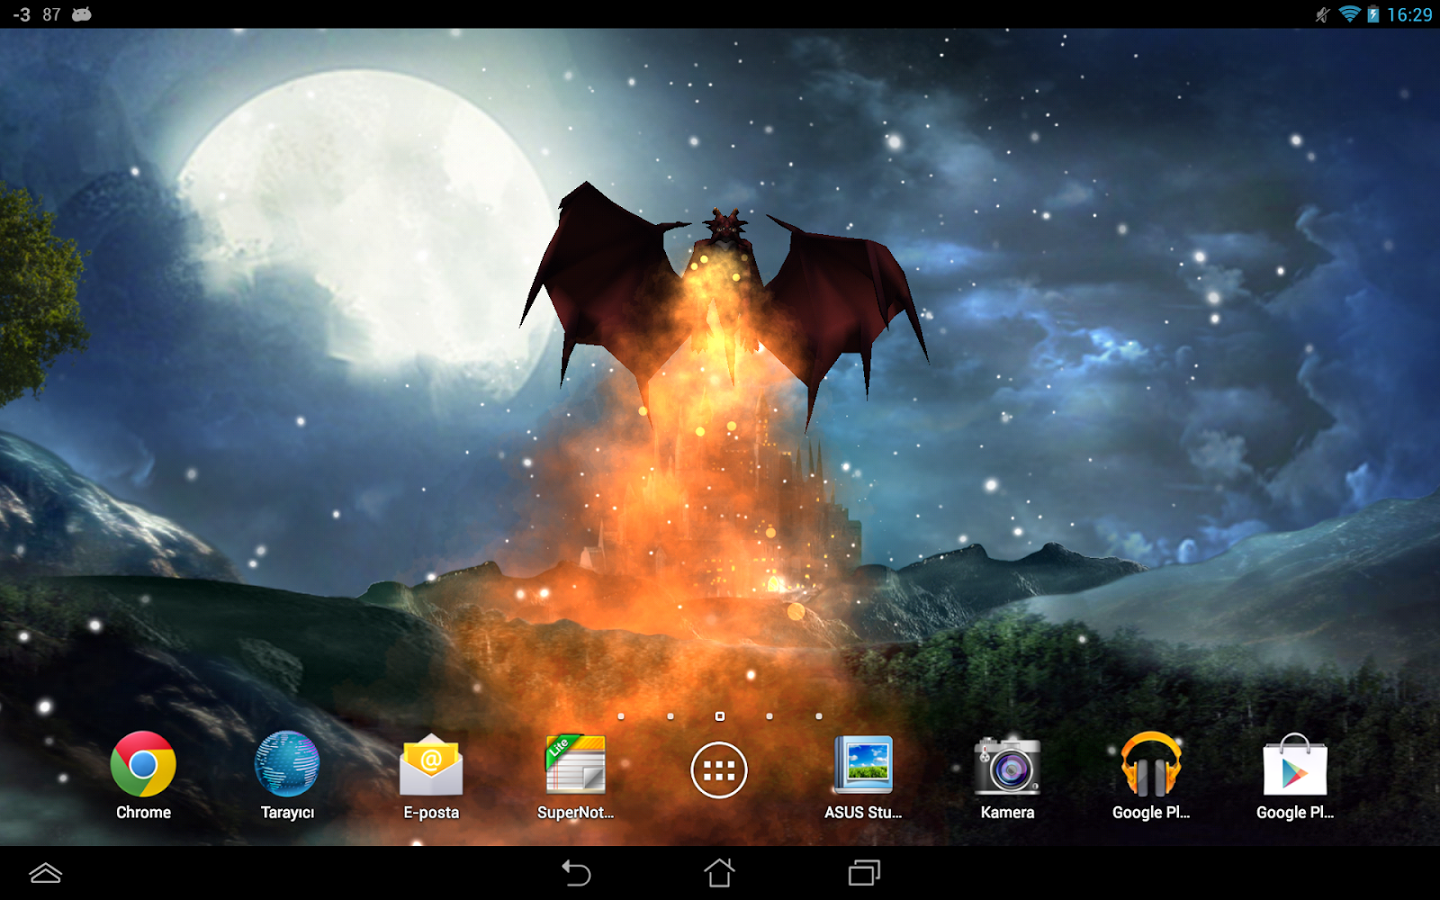 Dragon Live Wallpaper   Android Apps on Google Play 1440x900